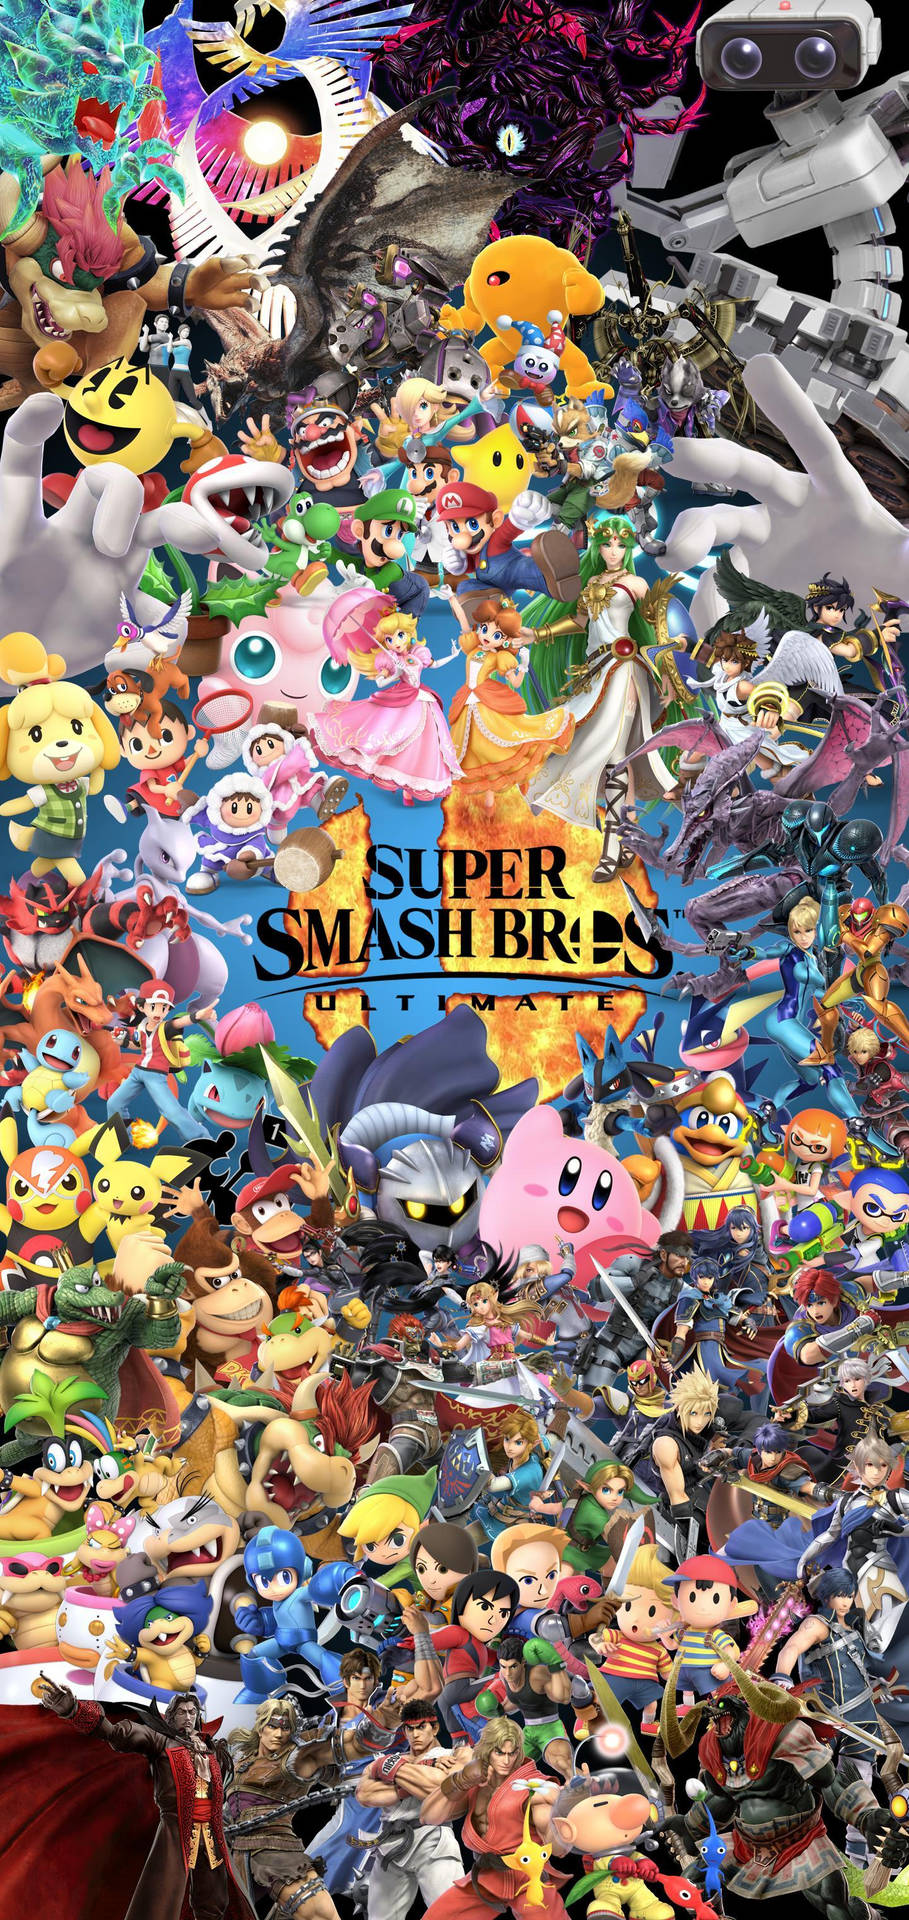 Get Ready to Join the Battle - Super Smash Bros. Ultimate Wallpaper